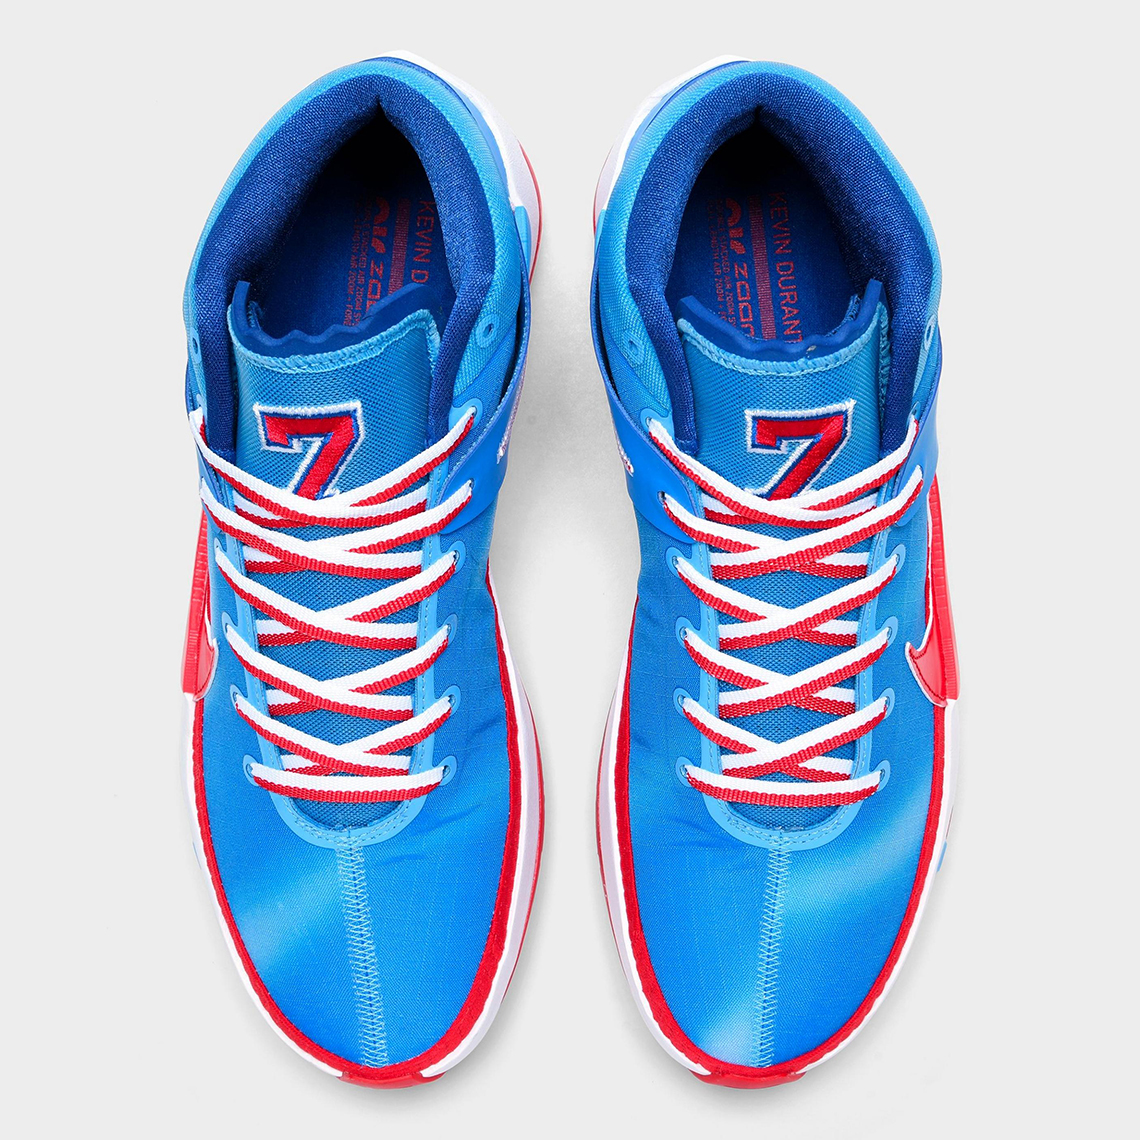 red and blue kd